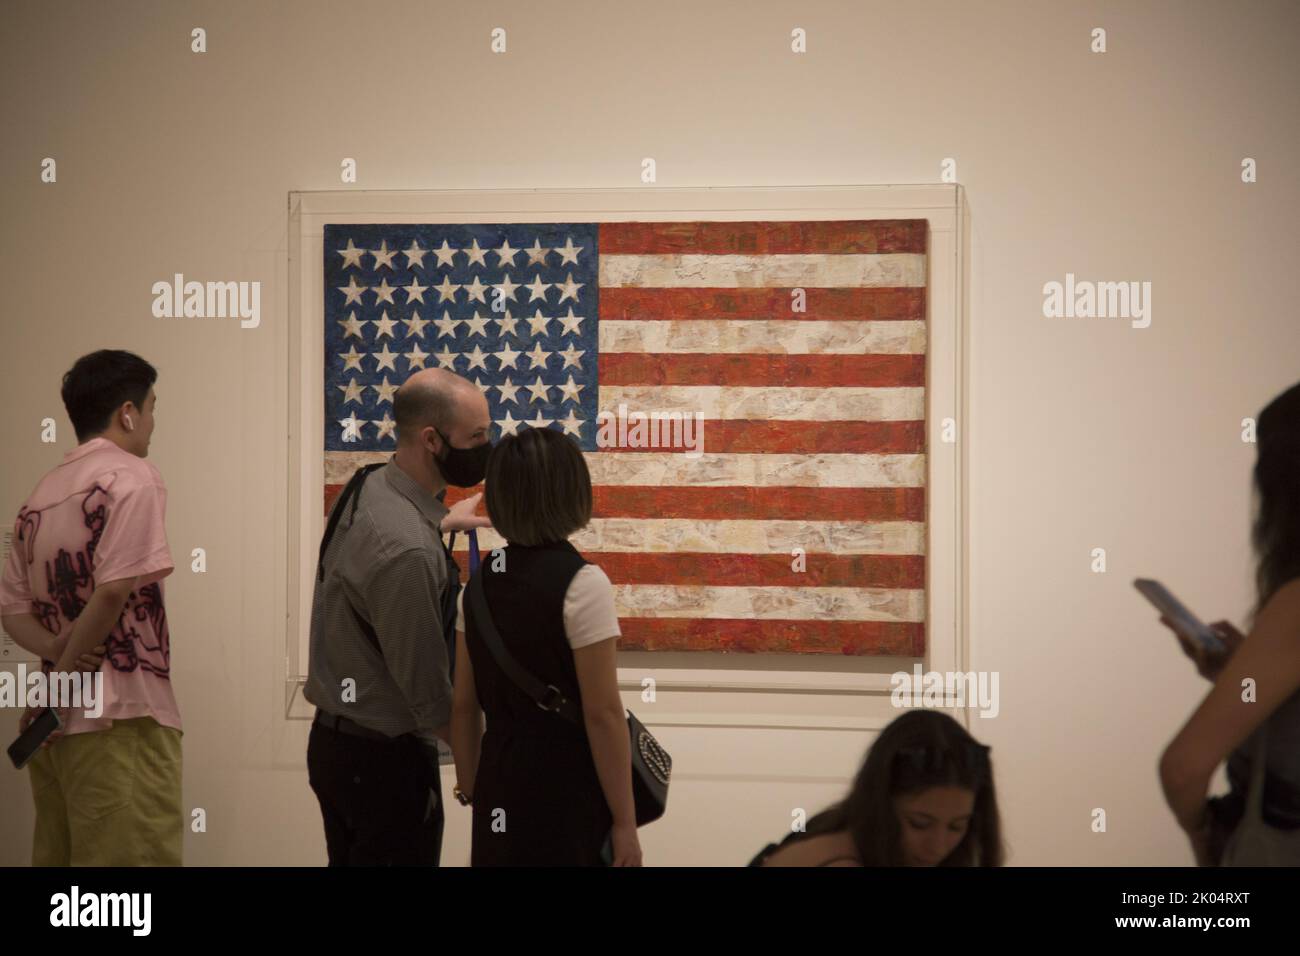 'Flag', 1954; Jasper Johns, Museum of Modern Art. Flag was made on a cut bedsheet using oil paint and then encaustic, a method involving pigmented melted wax. Stock Photo